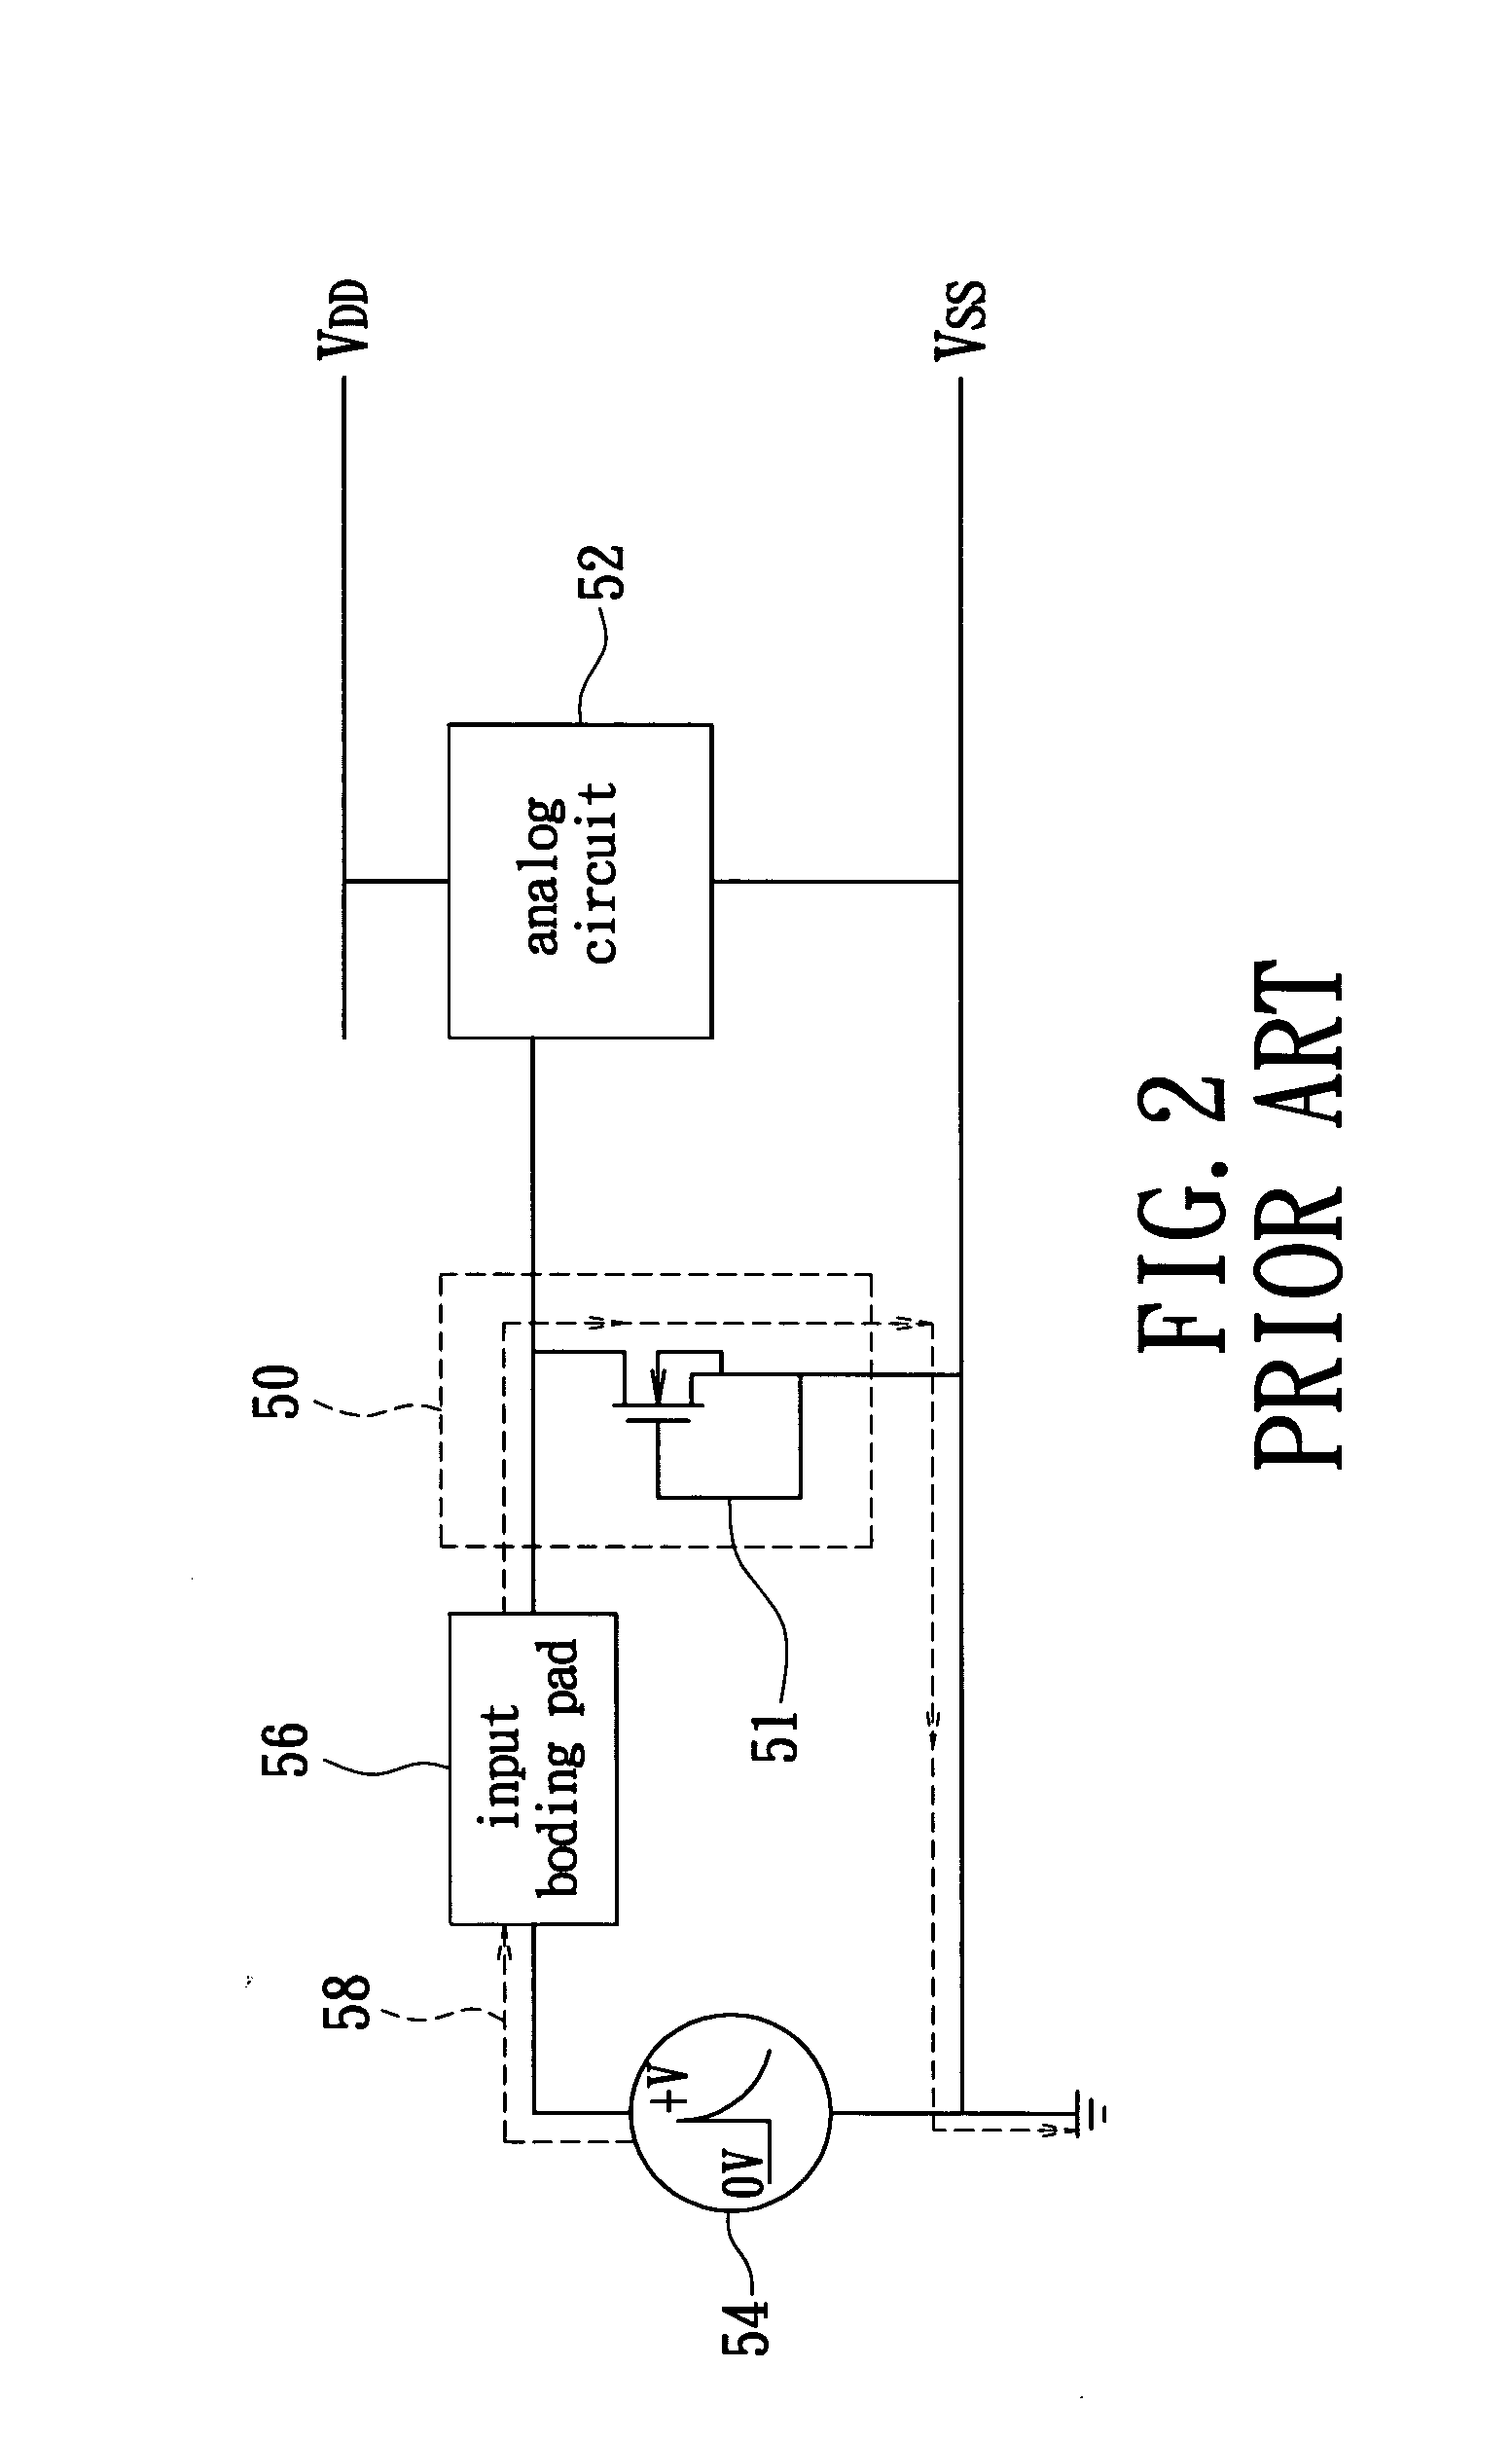 Protection circuit for electro static discharge